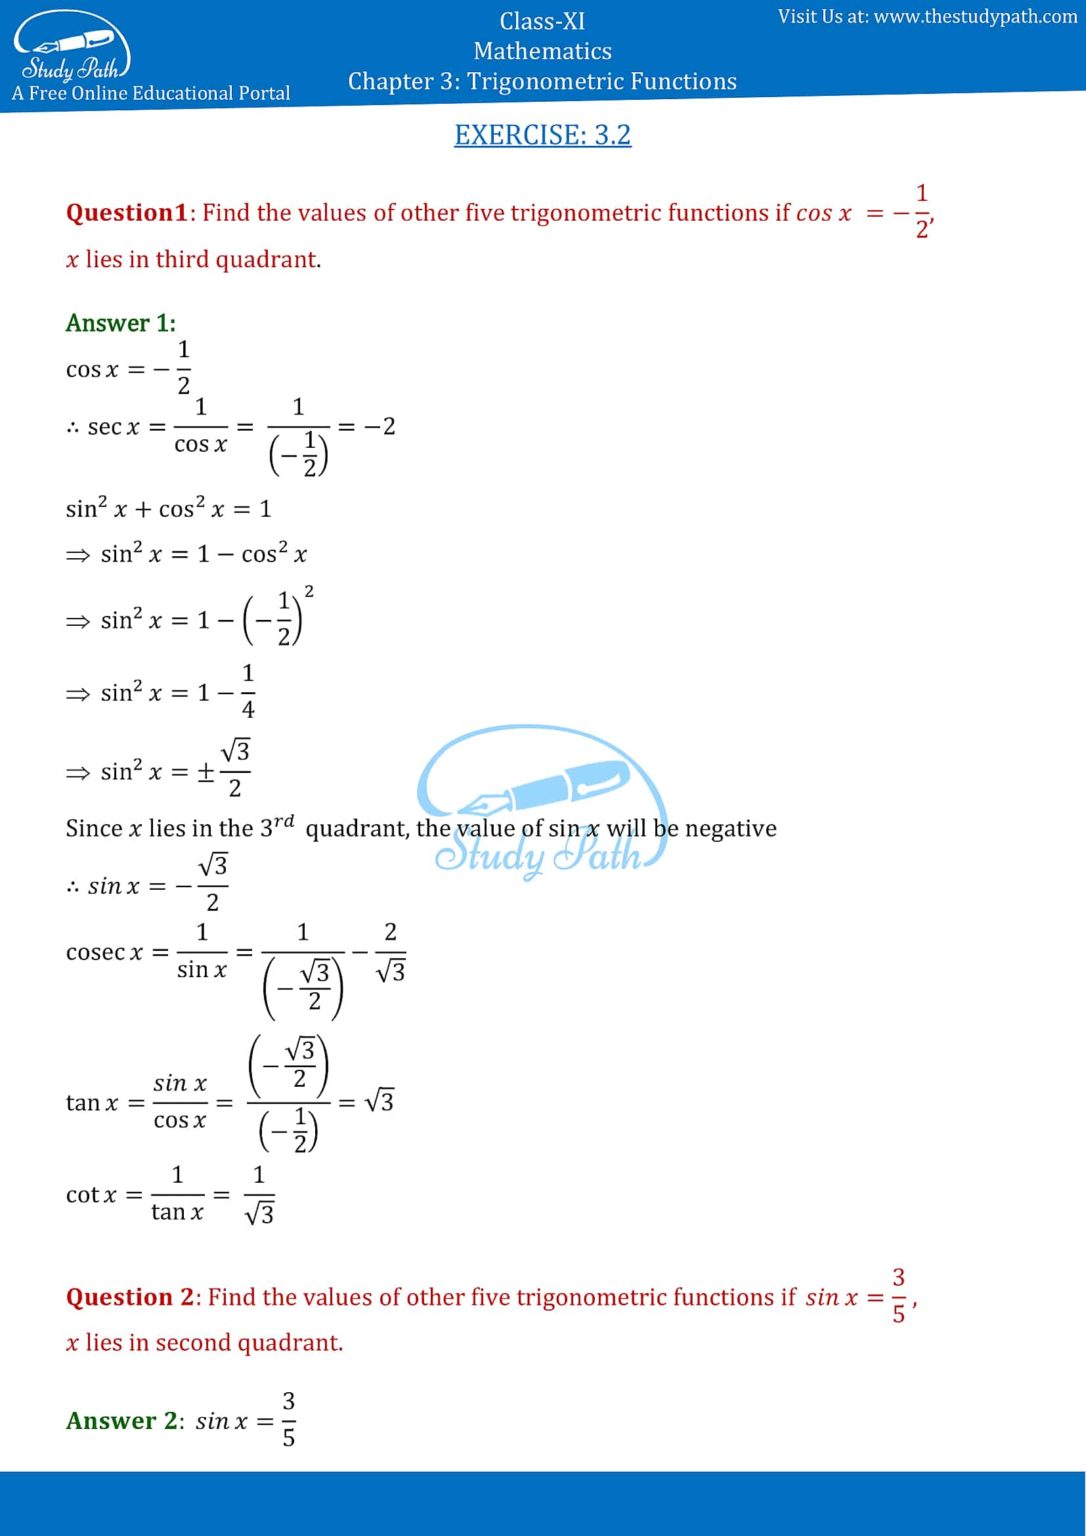 ncert-solutions-class-11-maths-chapter-3-exercise-3-2-study-path